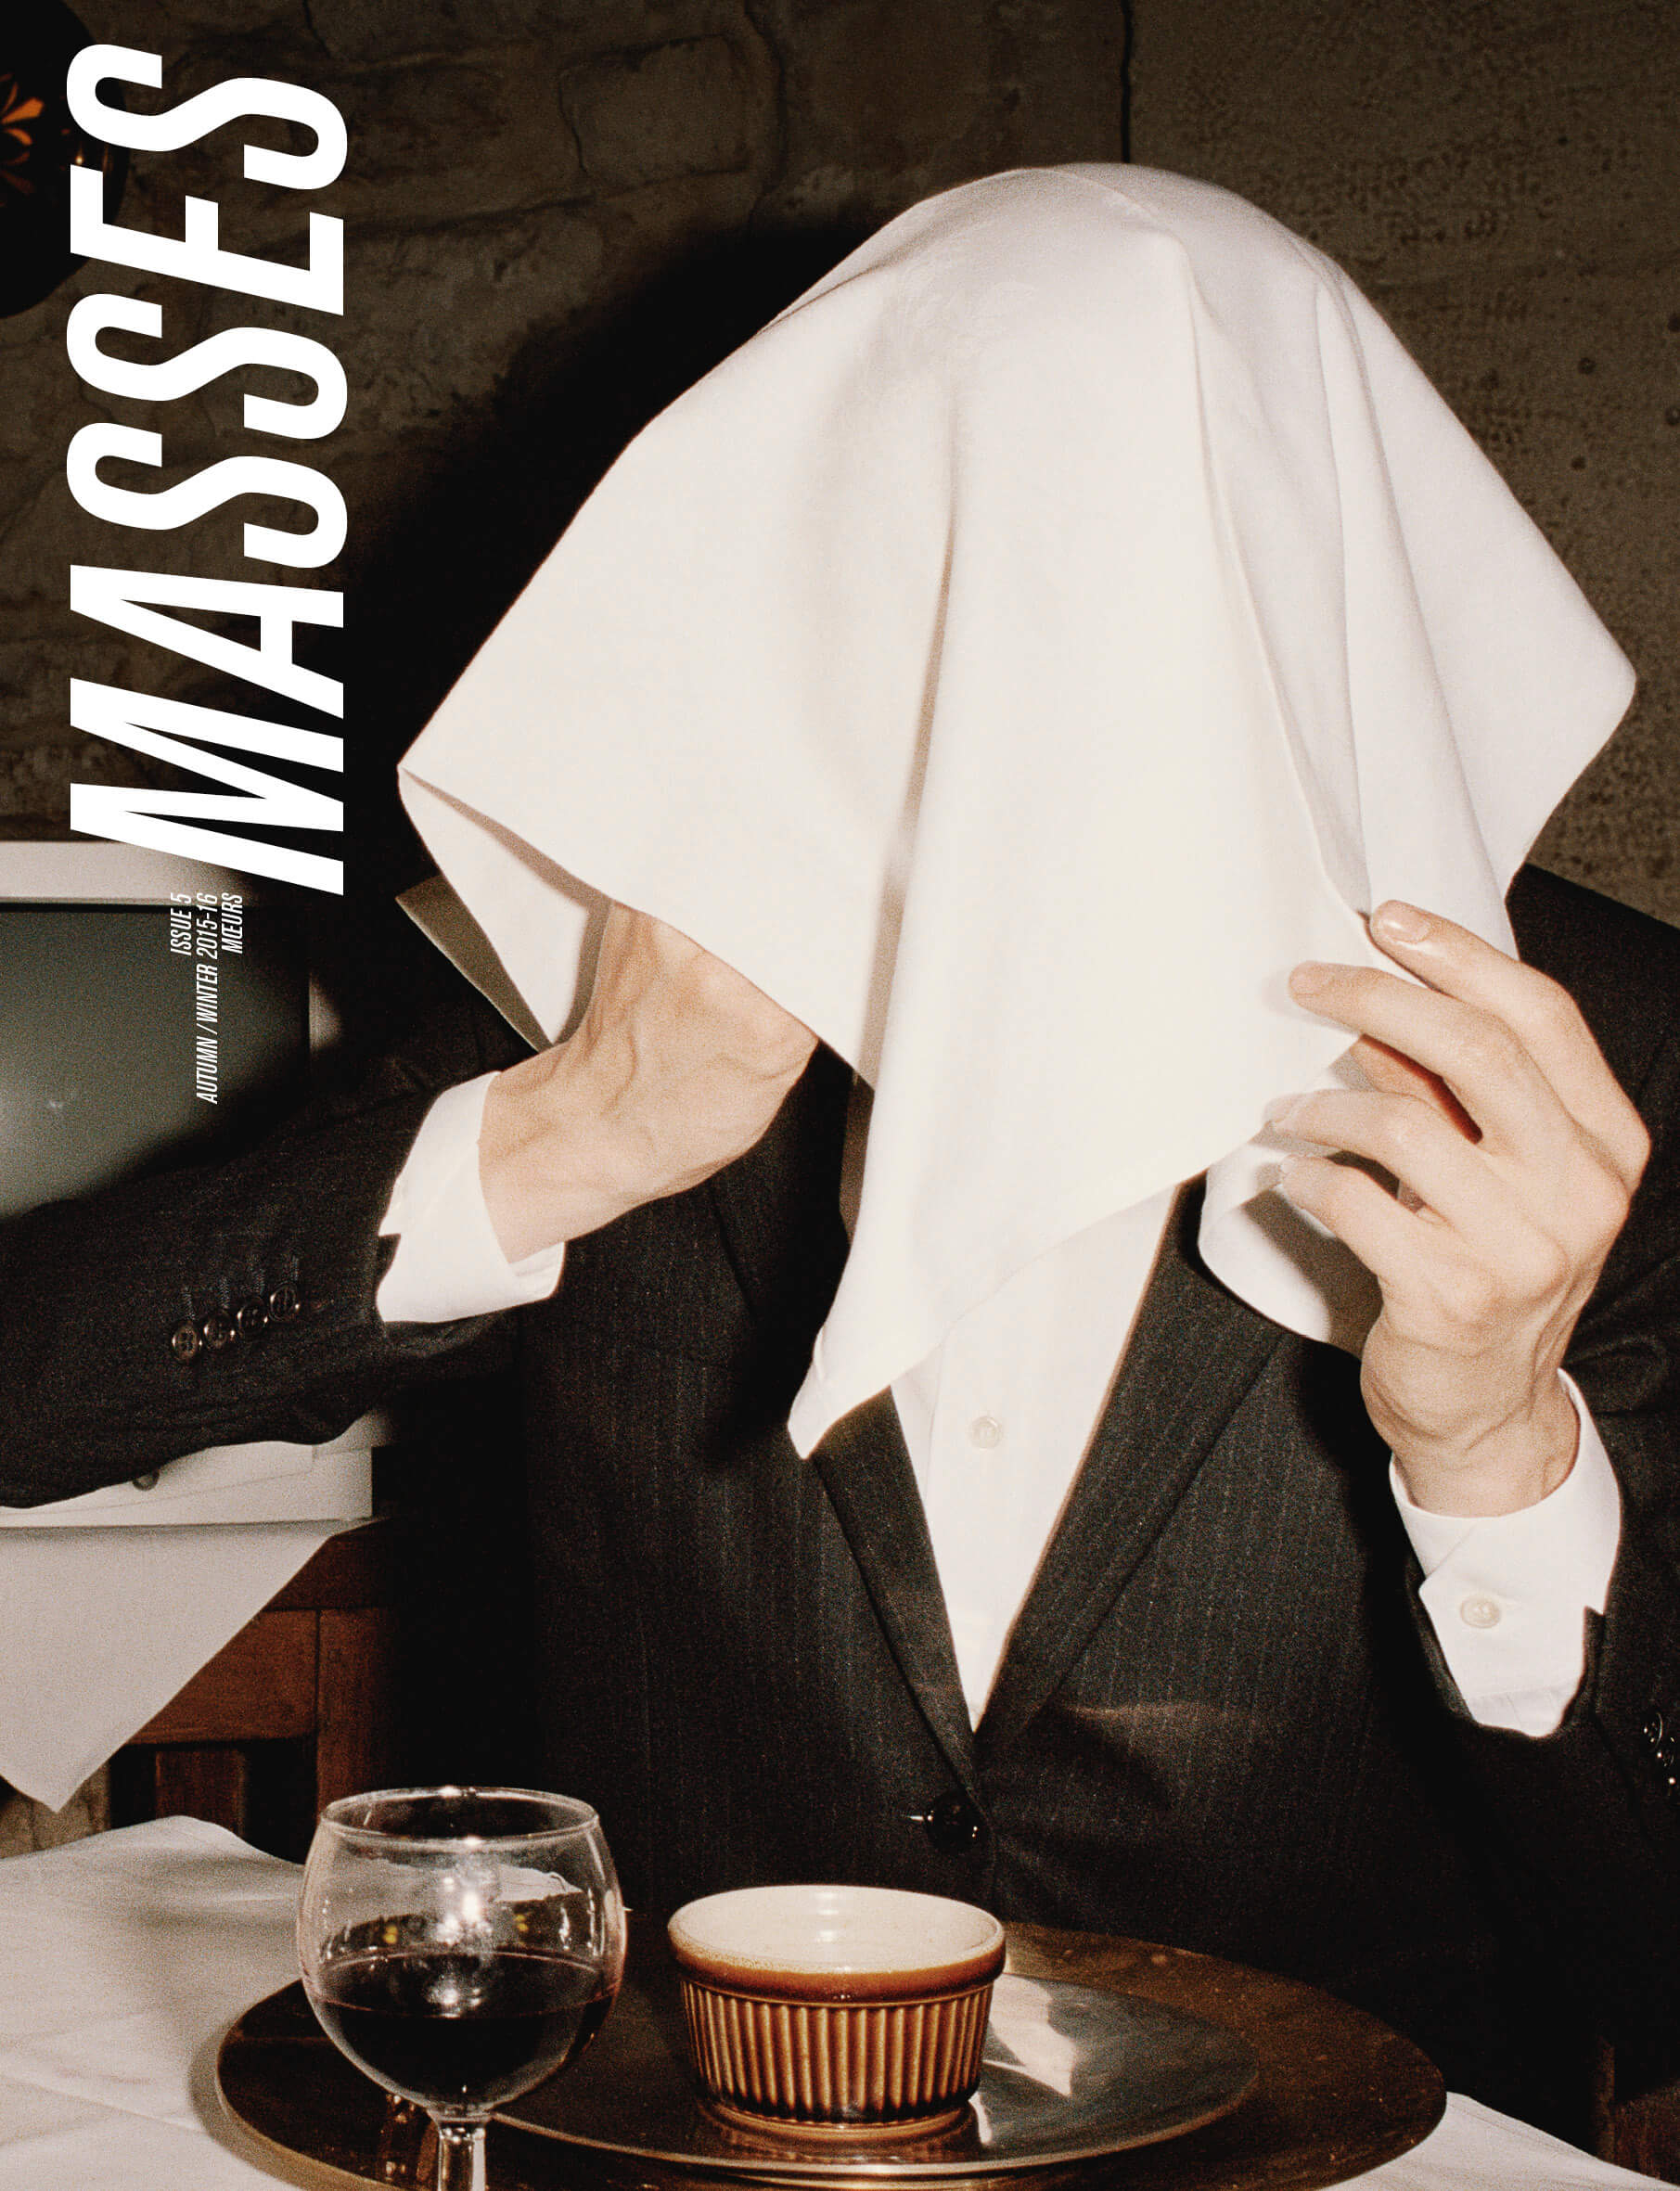 MASSES Magazine Issue No. 5 – Cover photographed by CG Watkins and Rich Aybar with Sacha Quintin eating ortolan birds wearing Saint Laurent by Hedi Slimane